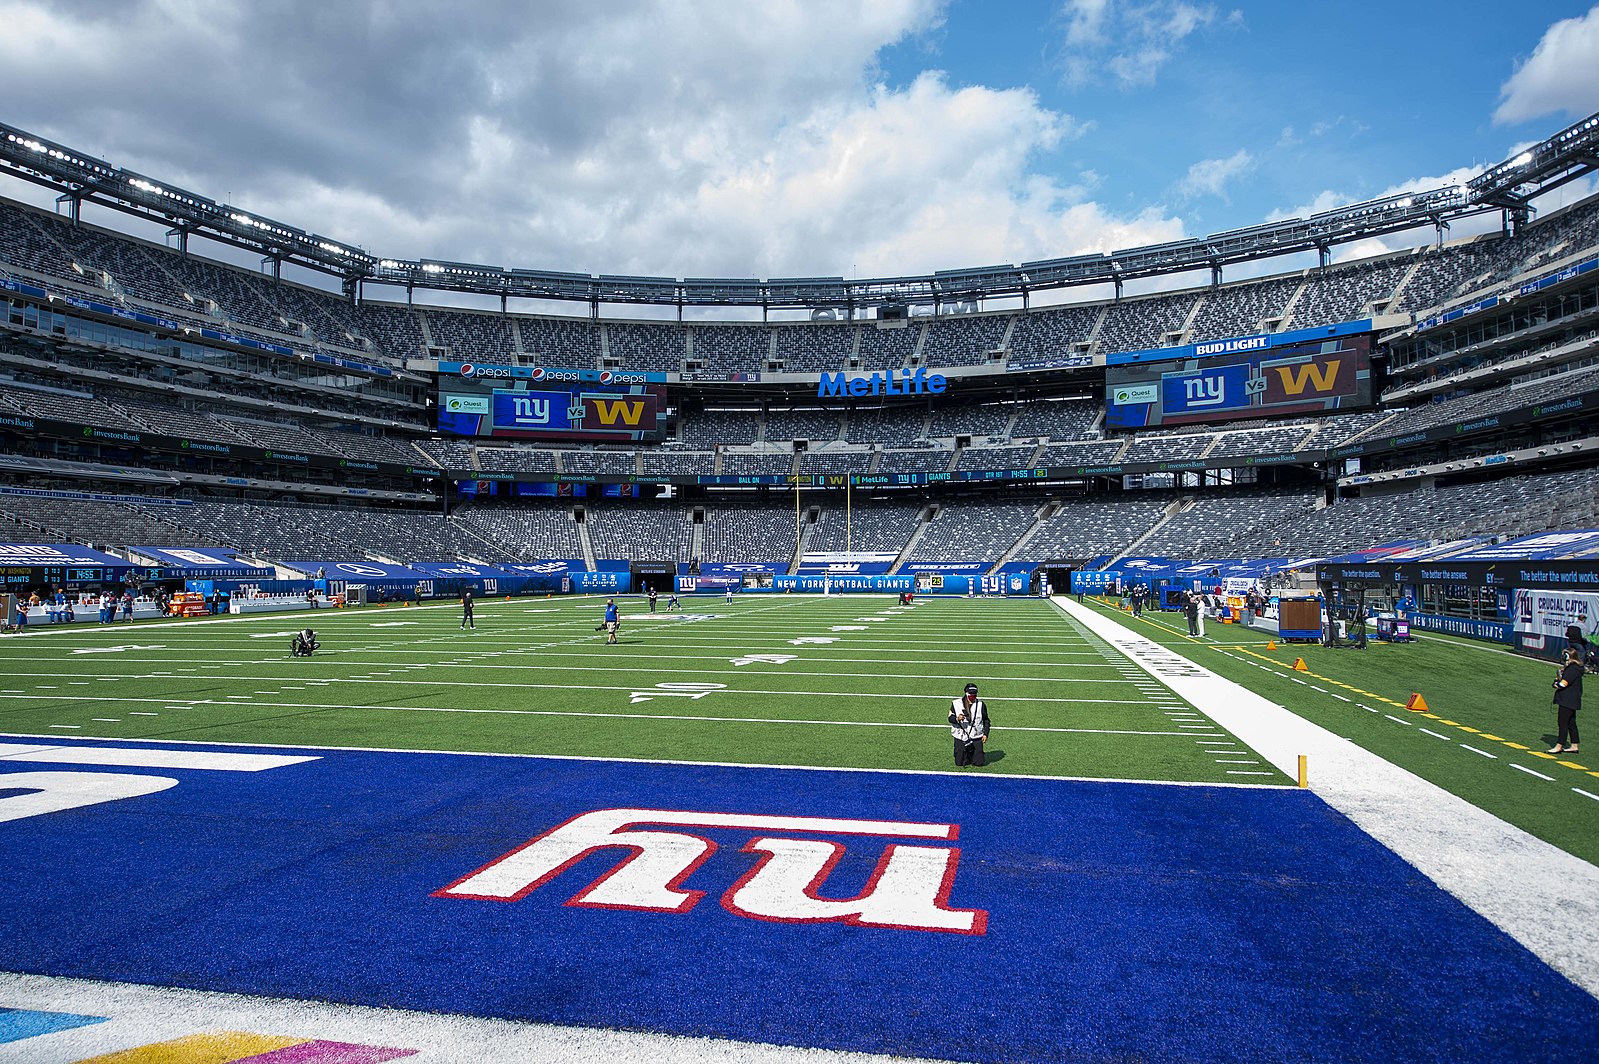 www.allproreels@gmail.com -- from the Washington Football Team vs. New York Giants at MetLife Stadium in East Rutherford, NJ. October 18, 2020 (All-Pro Reels Photography)